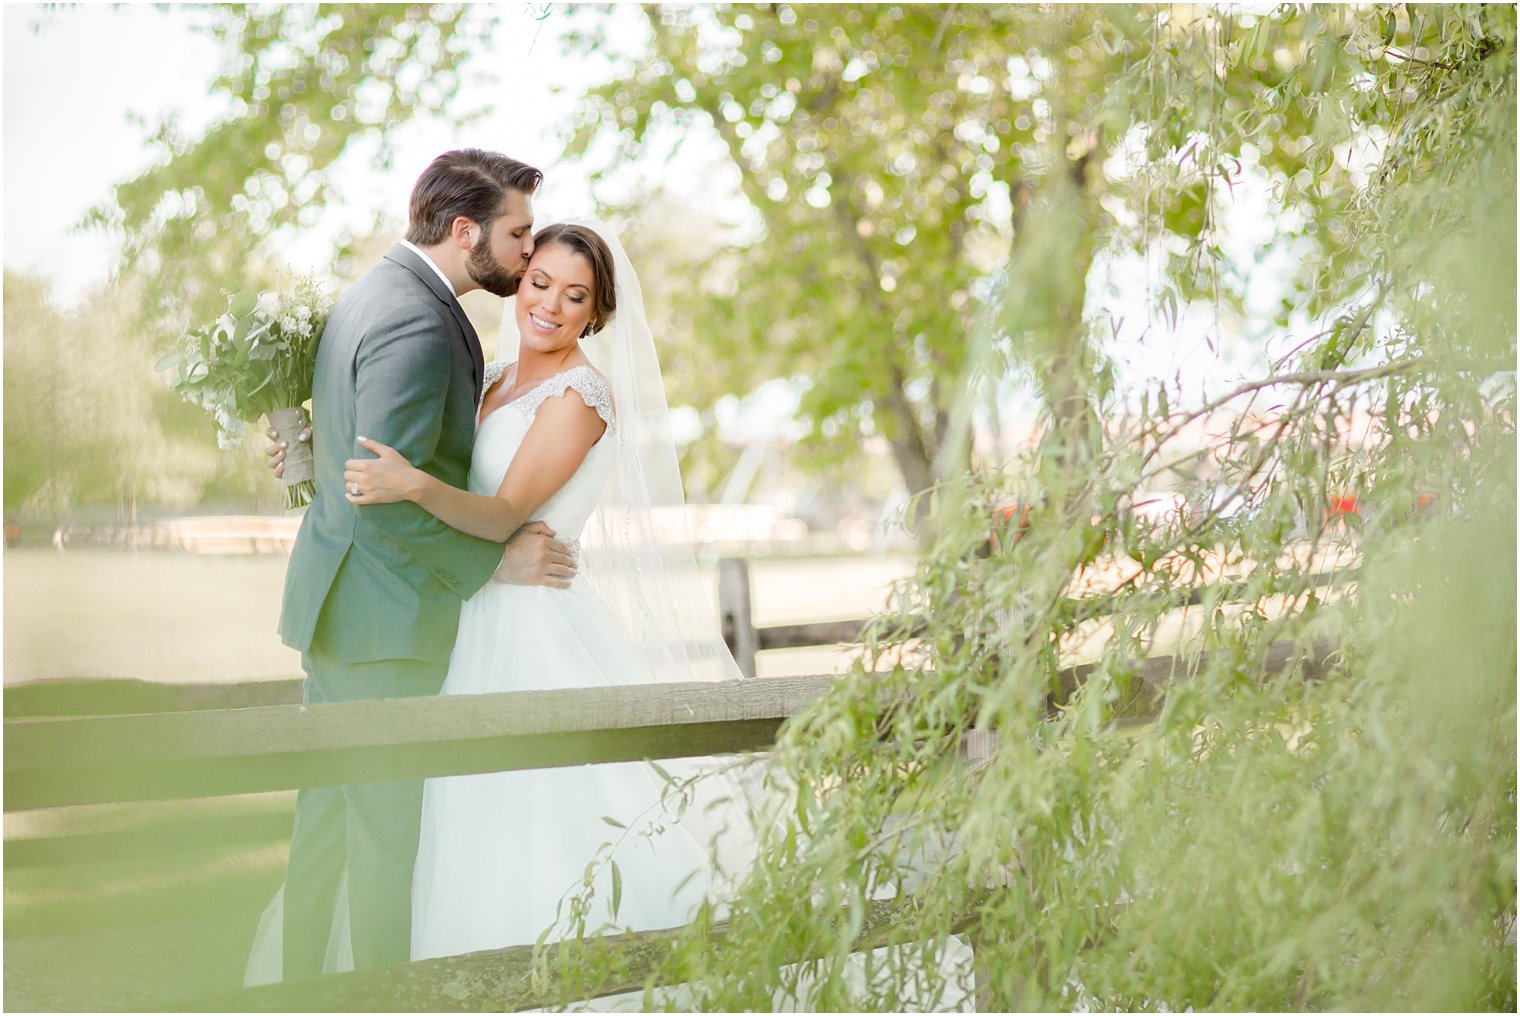 Romantic bride and groom photo at Windows on the Water at Frogbridge Wedding